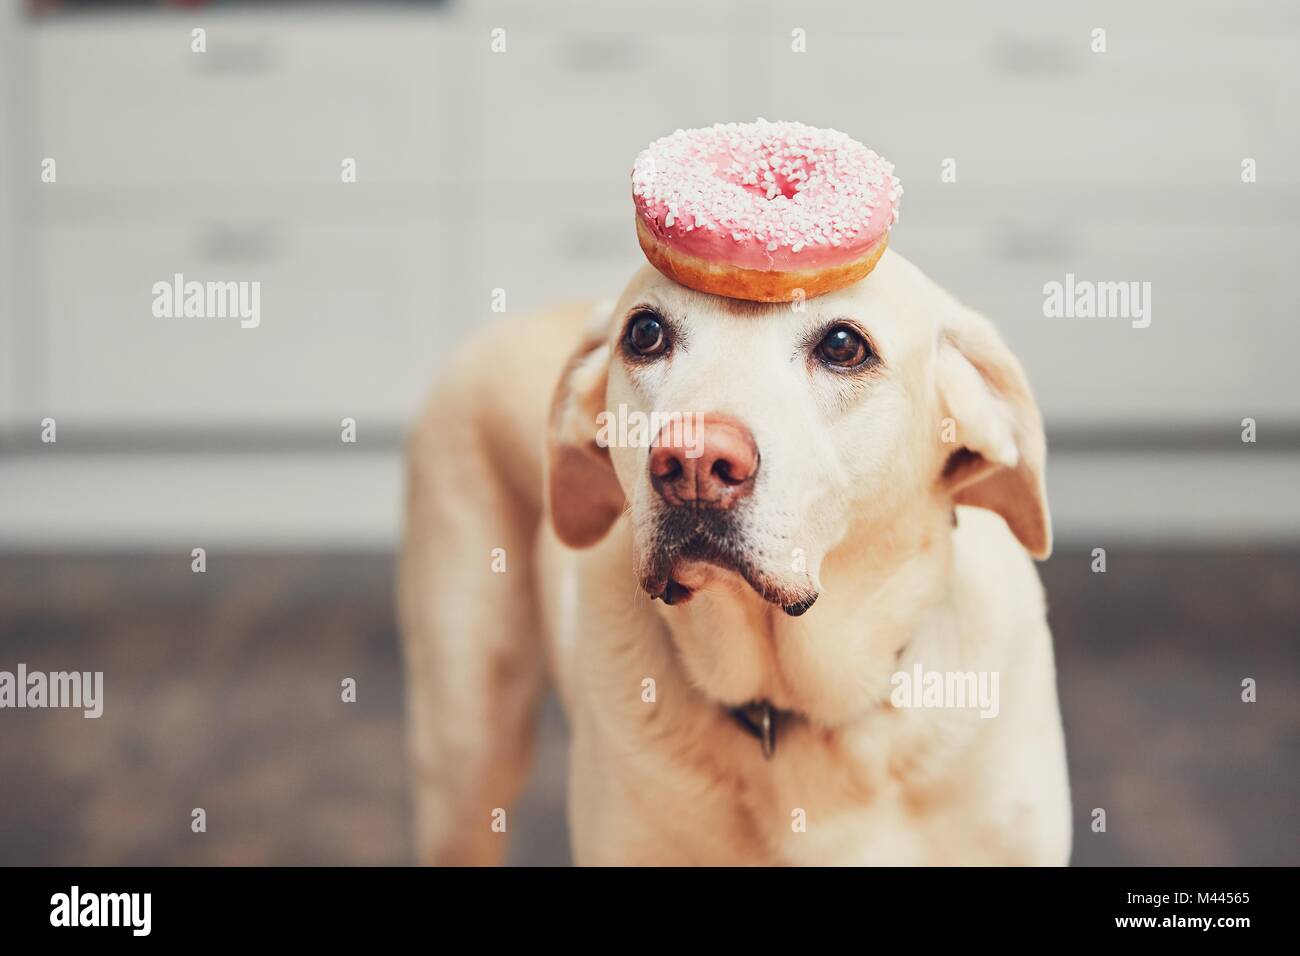 Funny portrait of the cute dog in the home kitchen. Labrador retriever keeps donut on his head. Stock Photo